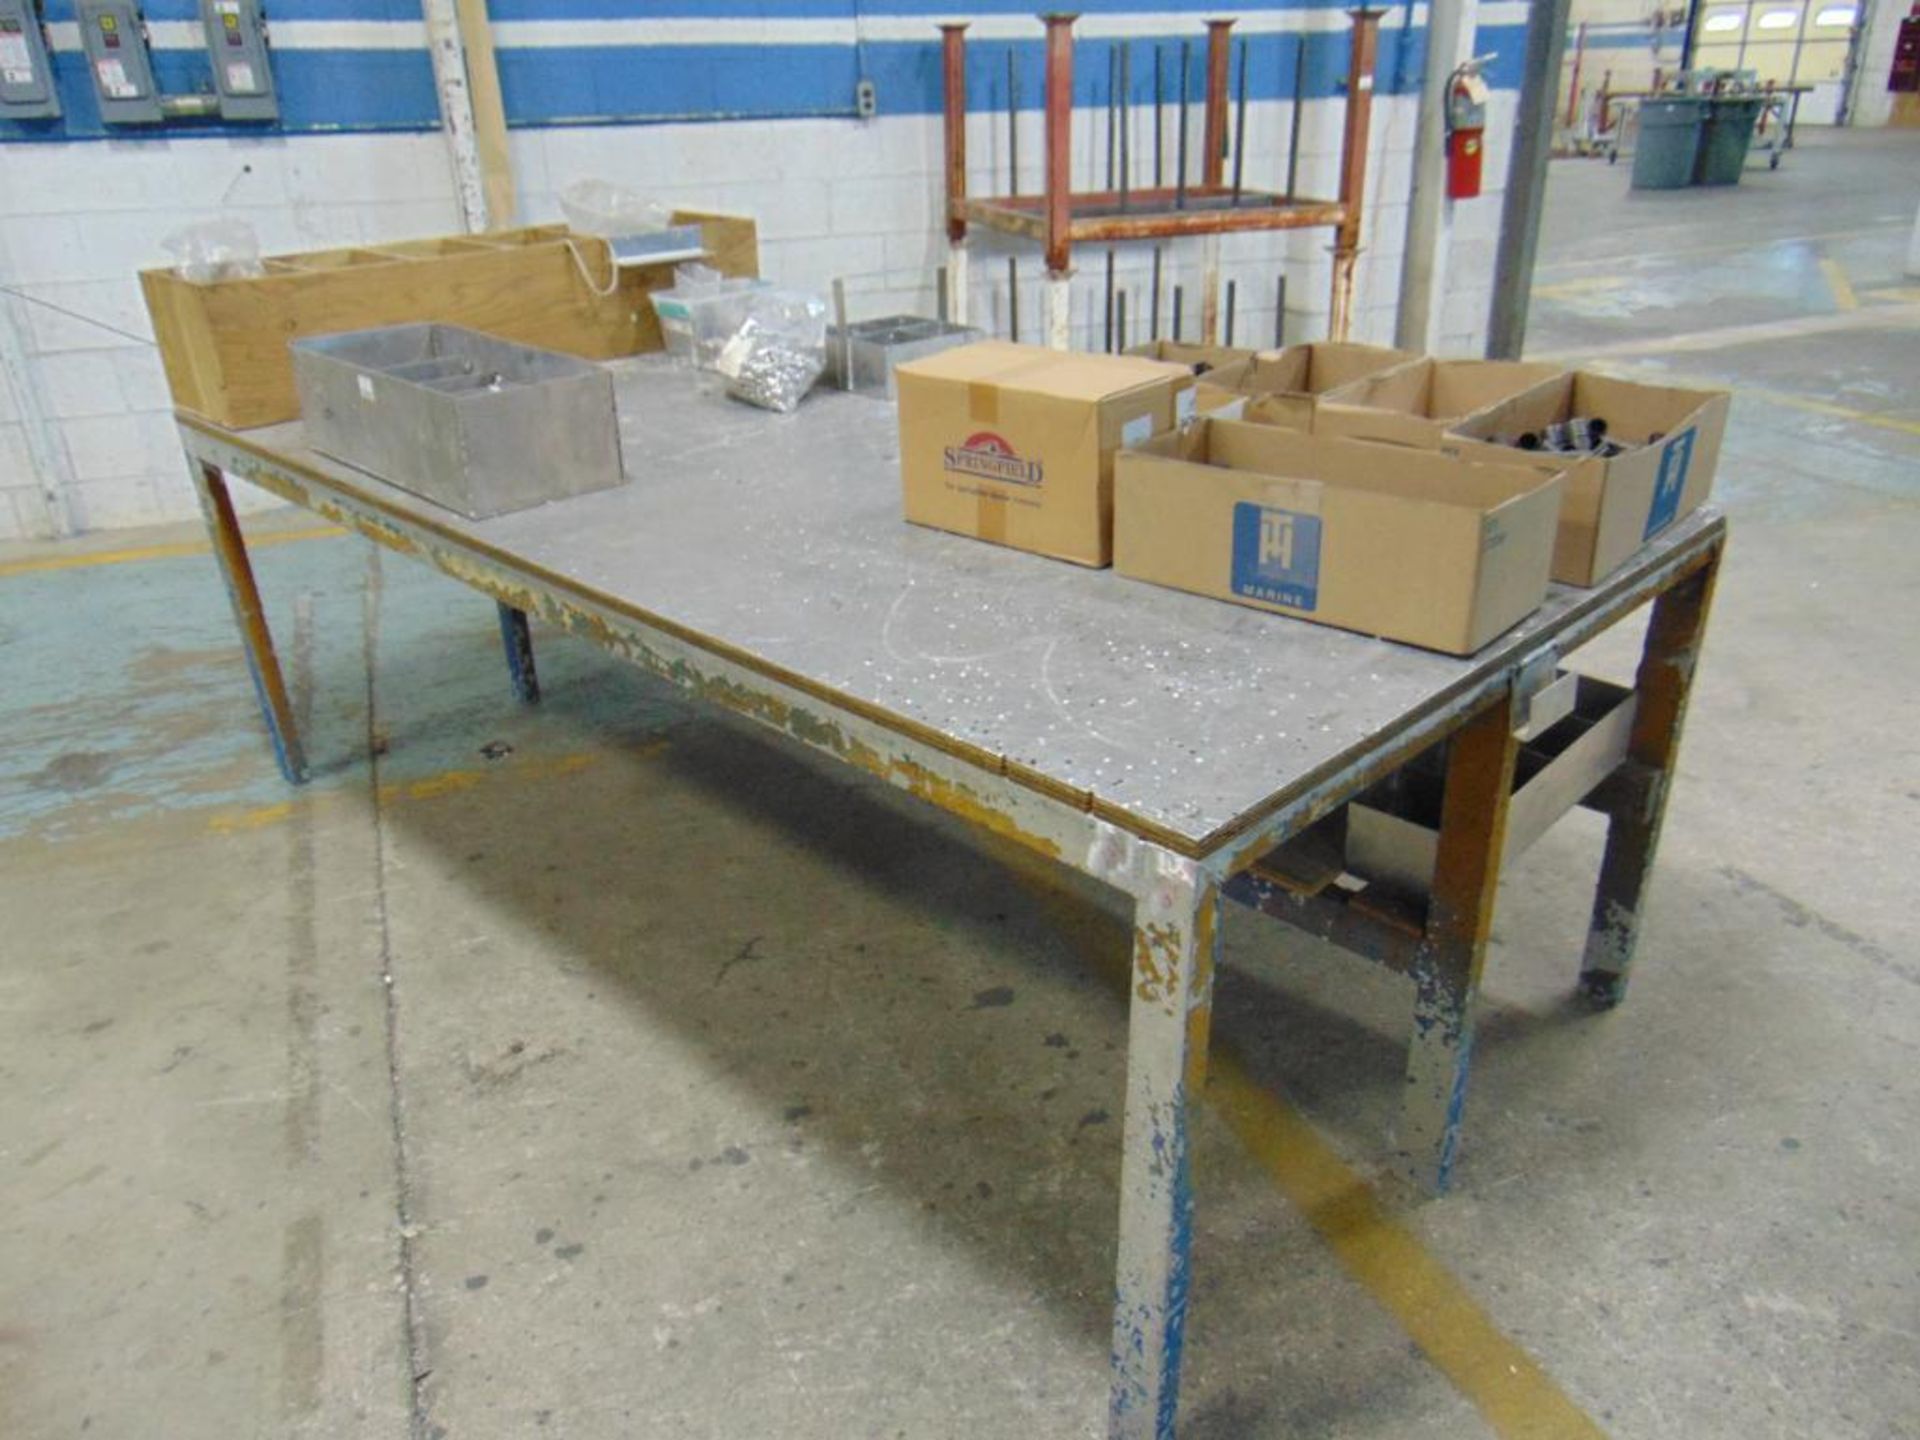 Aluminum Bench and Contents